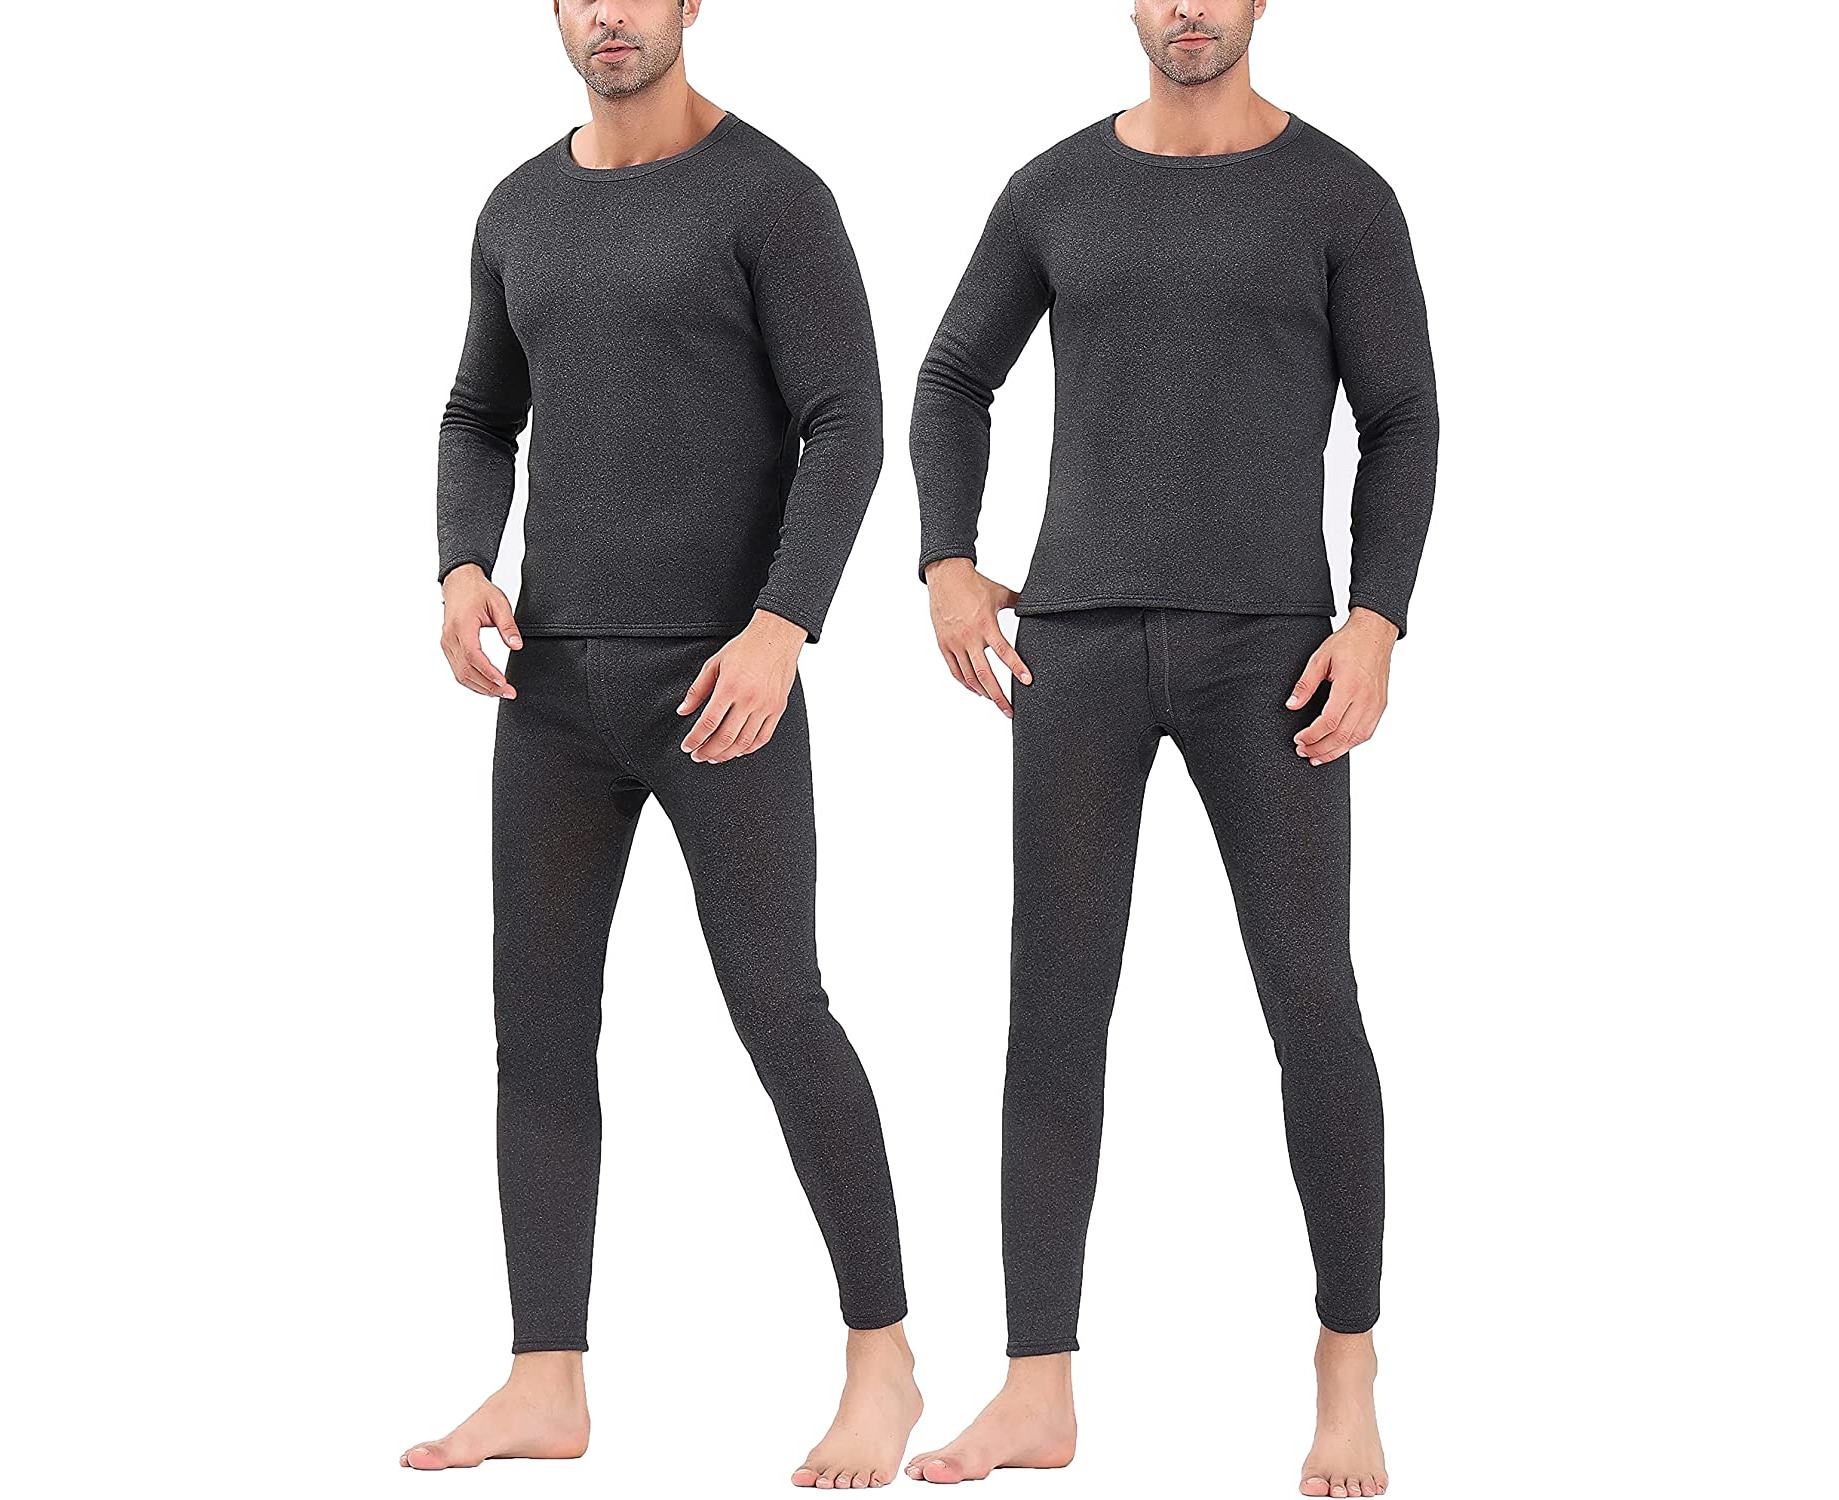 14 Amazing Men’s Thermal Underwear Sets For 2023